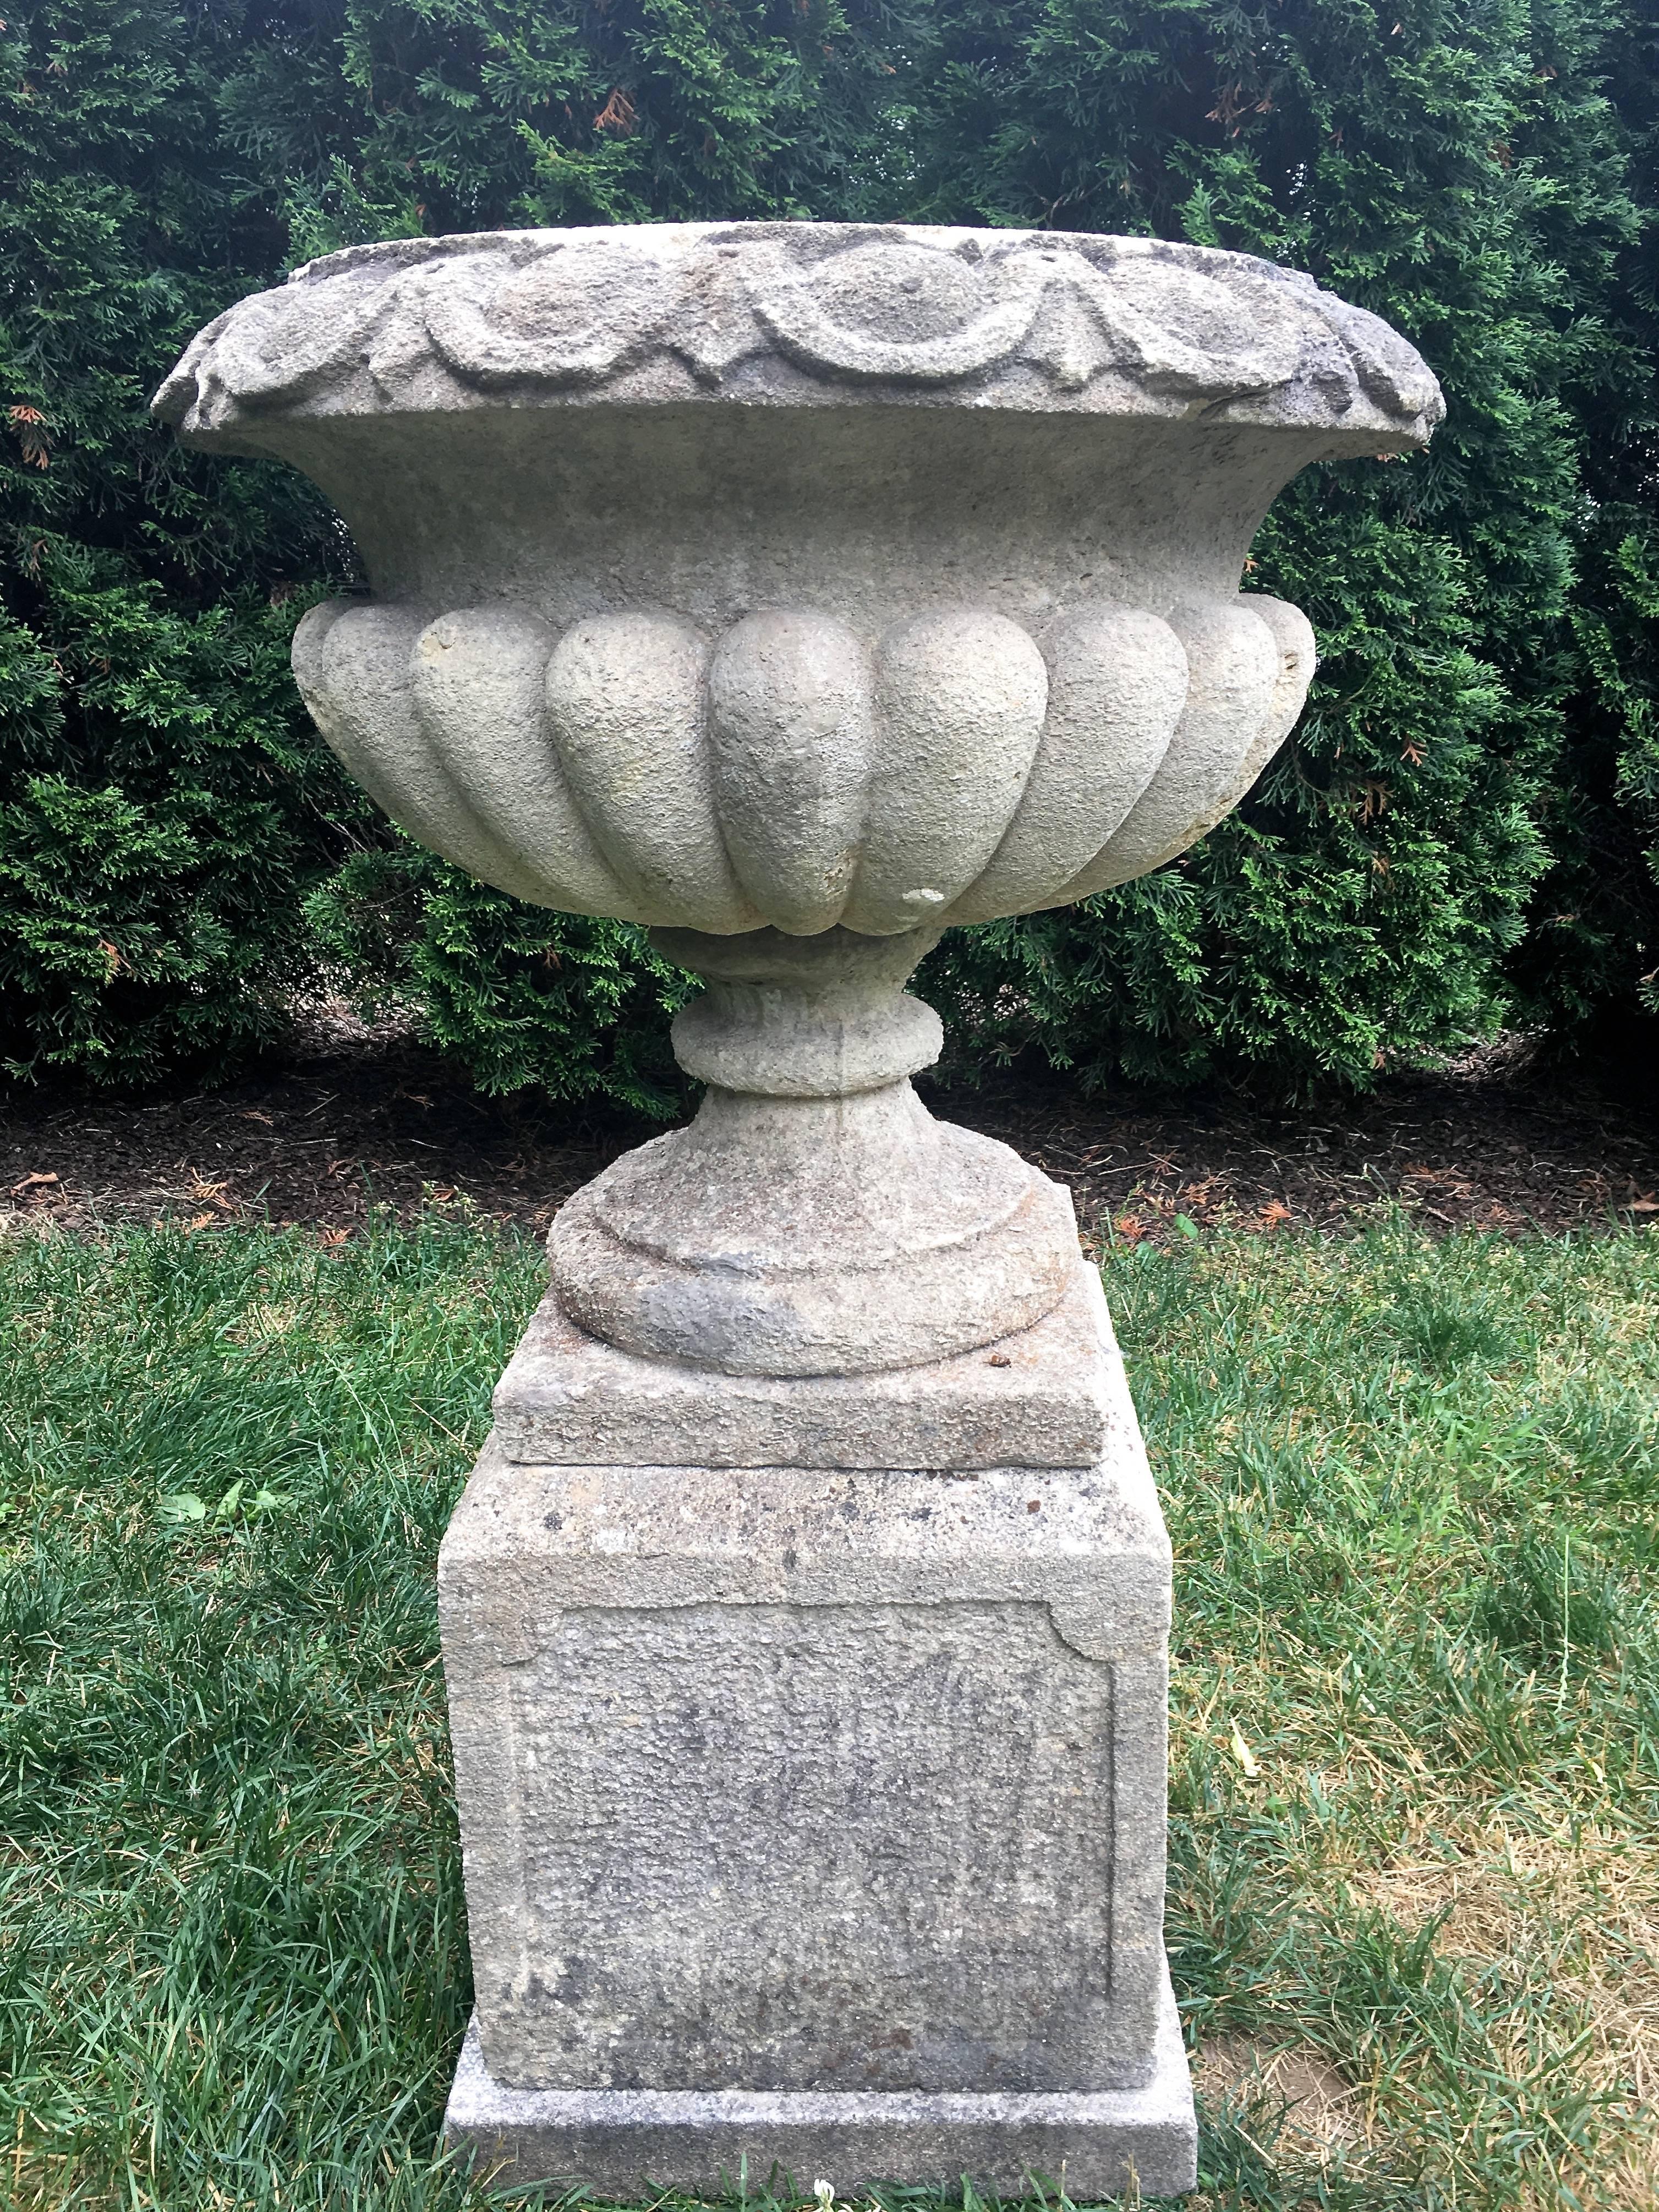 This is a wonderful example of mid-19th C stone carving in France. With a deeply-incised and stylized egg and dart rim, semi-lobed bowl, and subtle recessed panels on the base, this urn will be perfect as the center focal point in your herb or rose